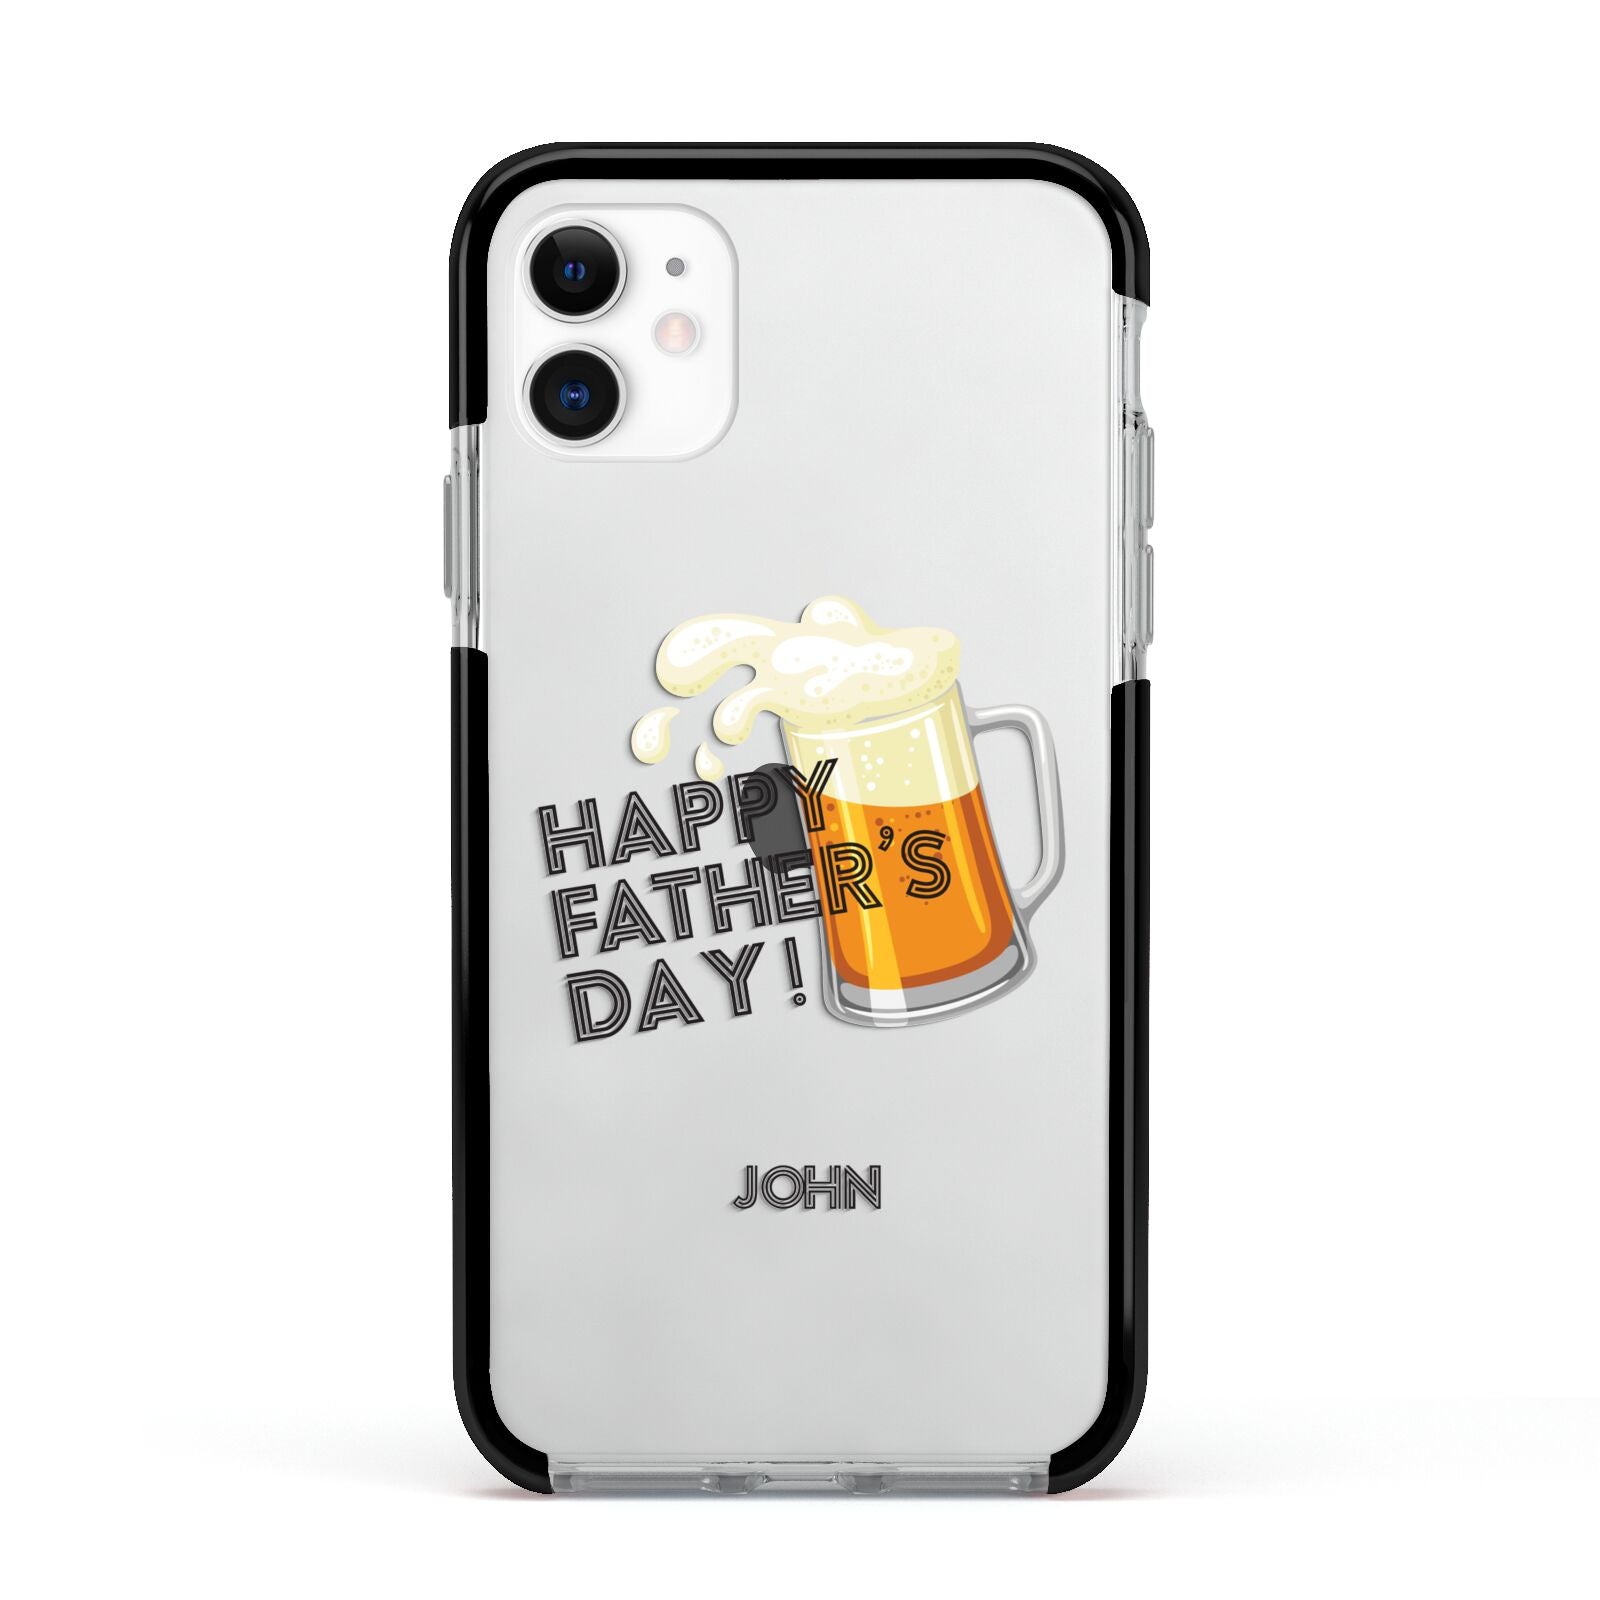 Fathers Day Custom Apple iPhone 11 in White with Black Impact Case